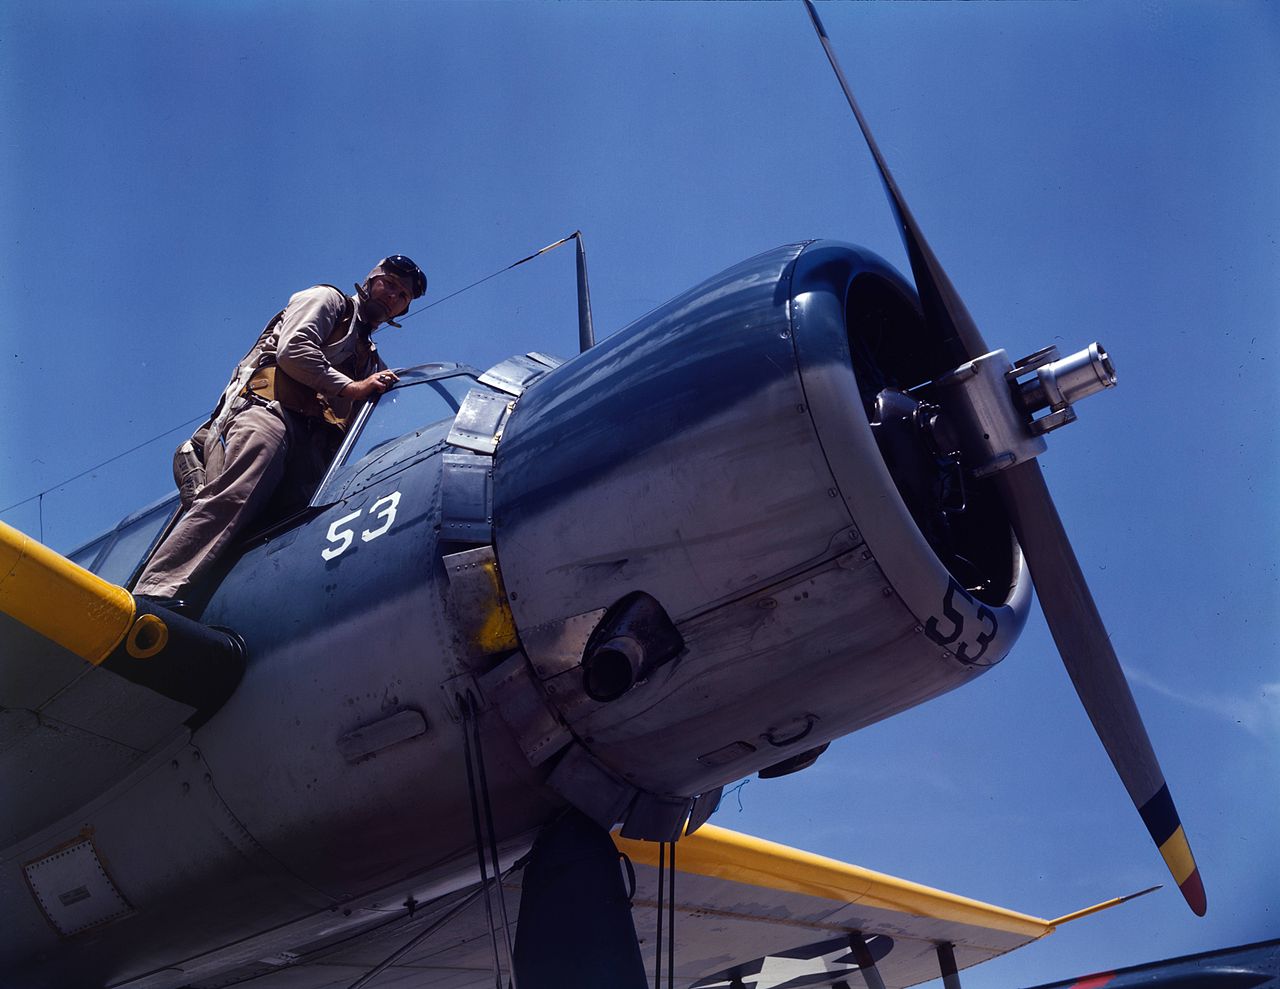 A U.S. Navy aviation cadet in training on a Vought OS2U Kingfisher at the Naval Air Station Corpus Christi, Texas (USA)